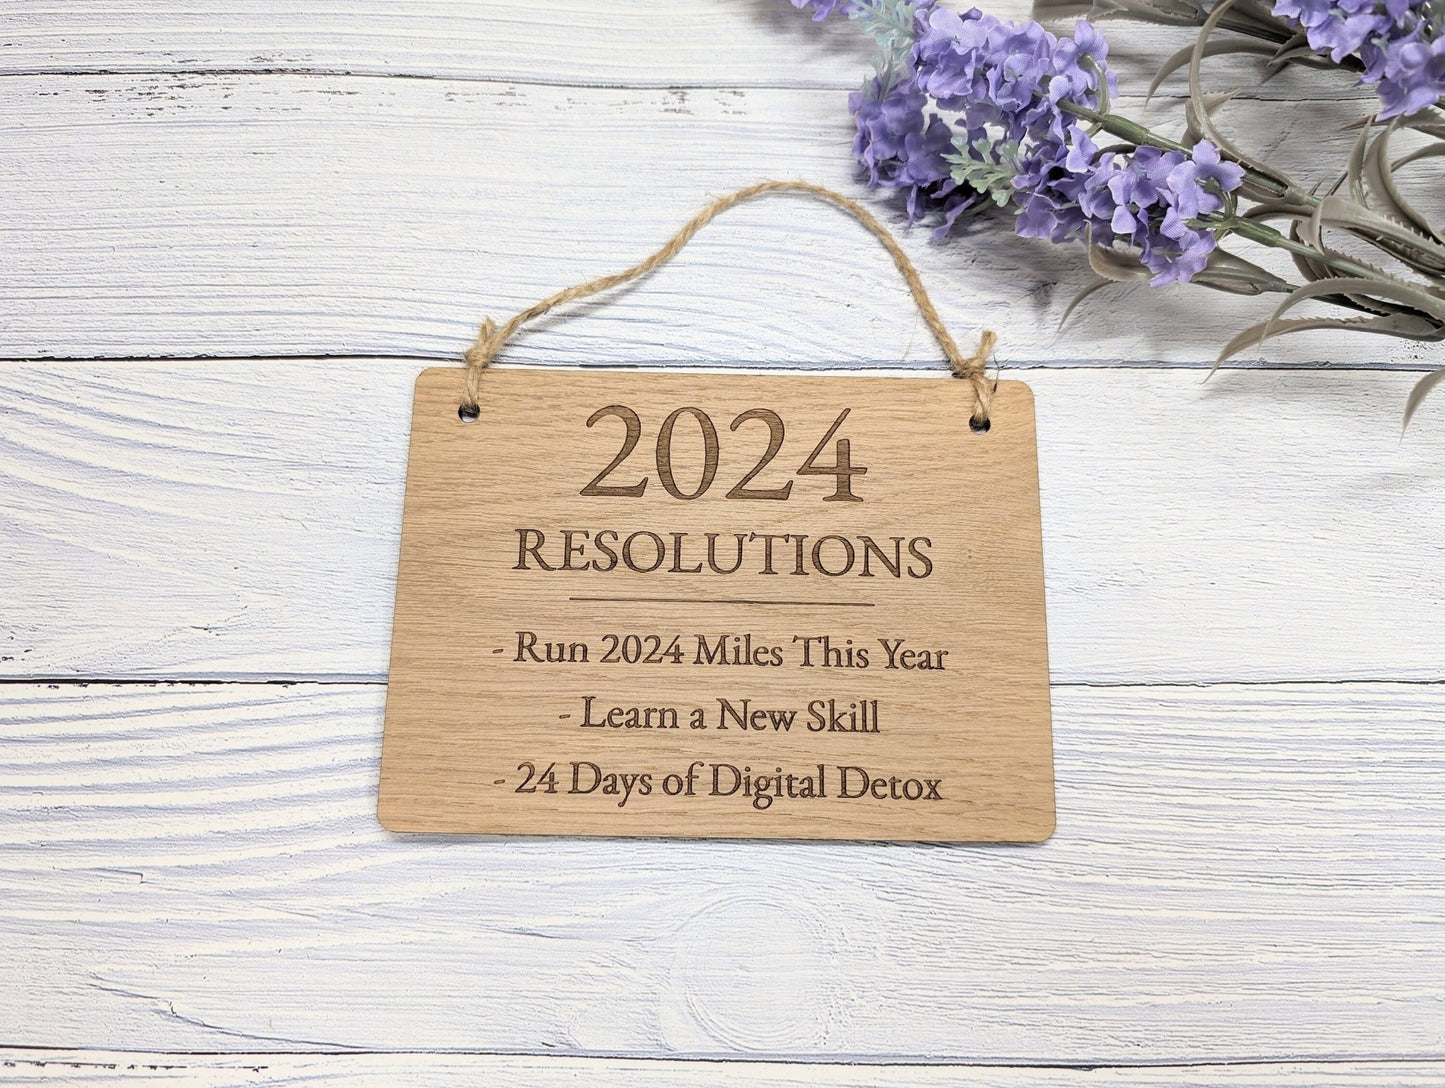 New Year's Resolution Sign - Personalised Goals for 2024 - Oak Veneer - Up to 6 Lines of Custom Resolutions - Start Your Year Right - CherryGroveCraft